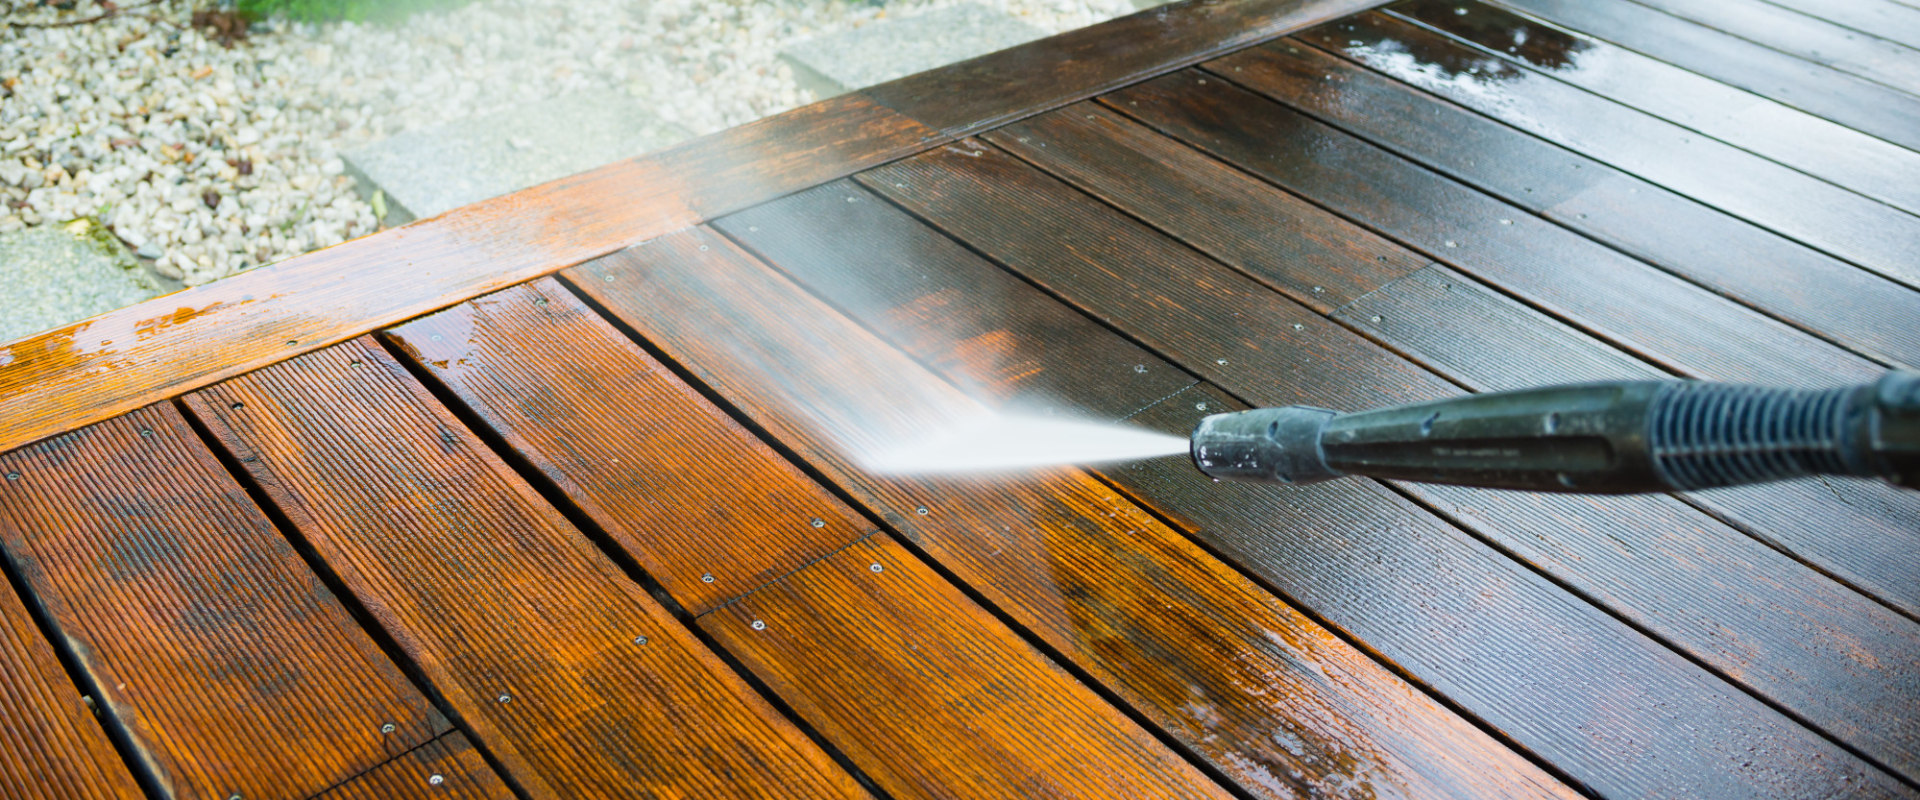 Can I Pressure Wash My Deck Safely?